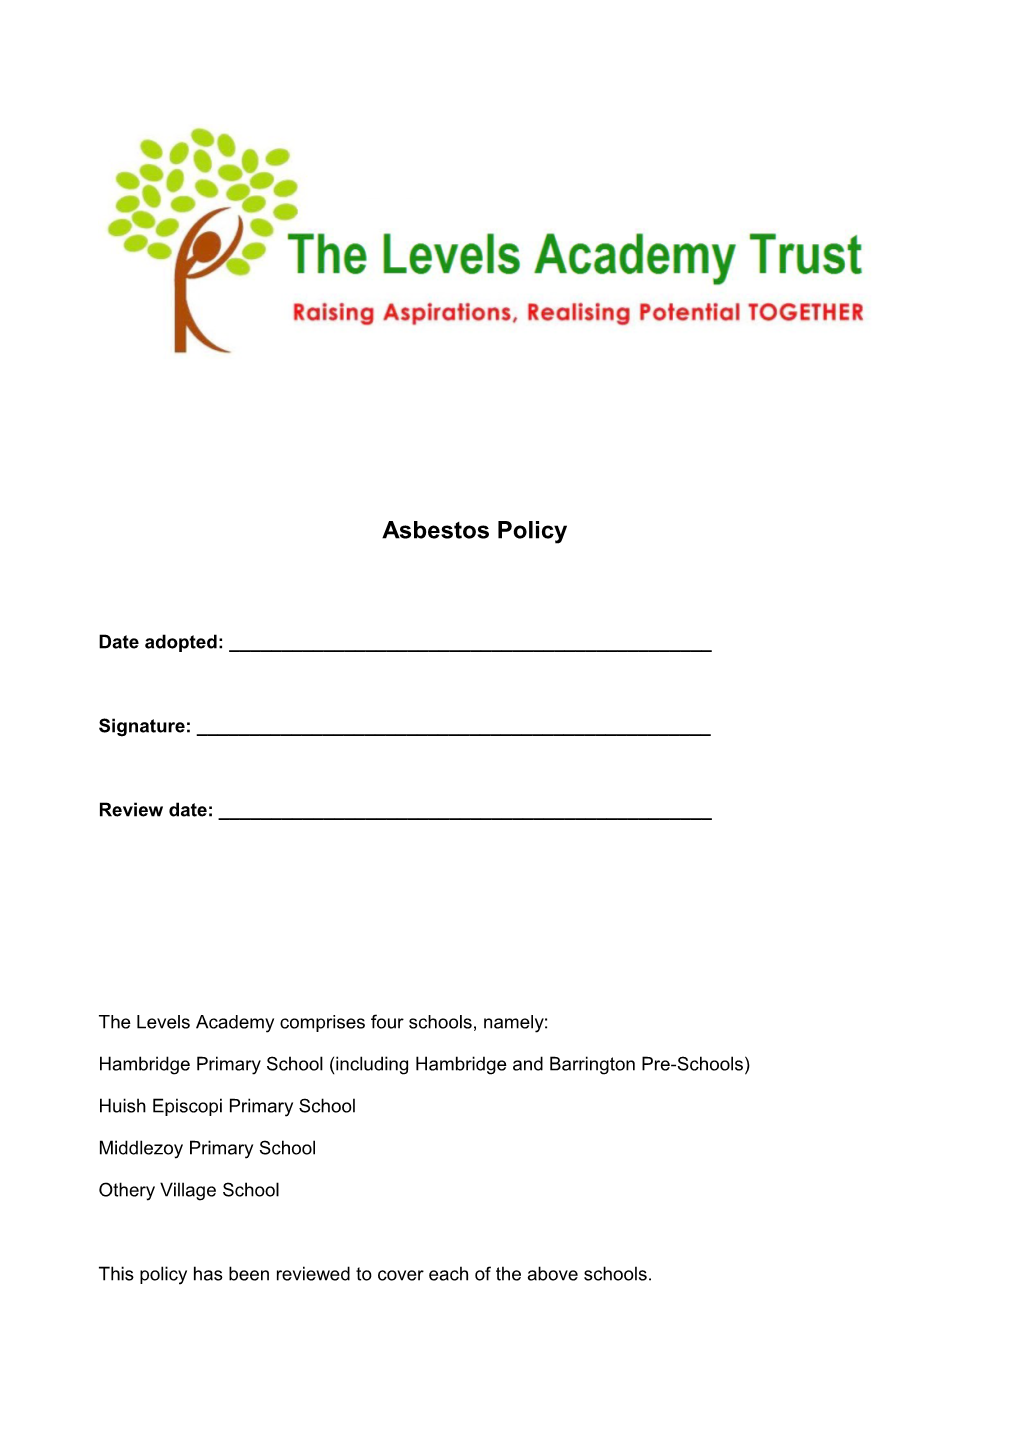 The Levels Academy Comprises Four Schools, Namely